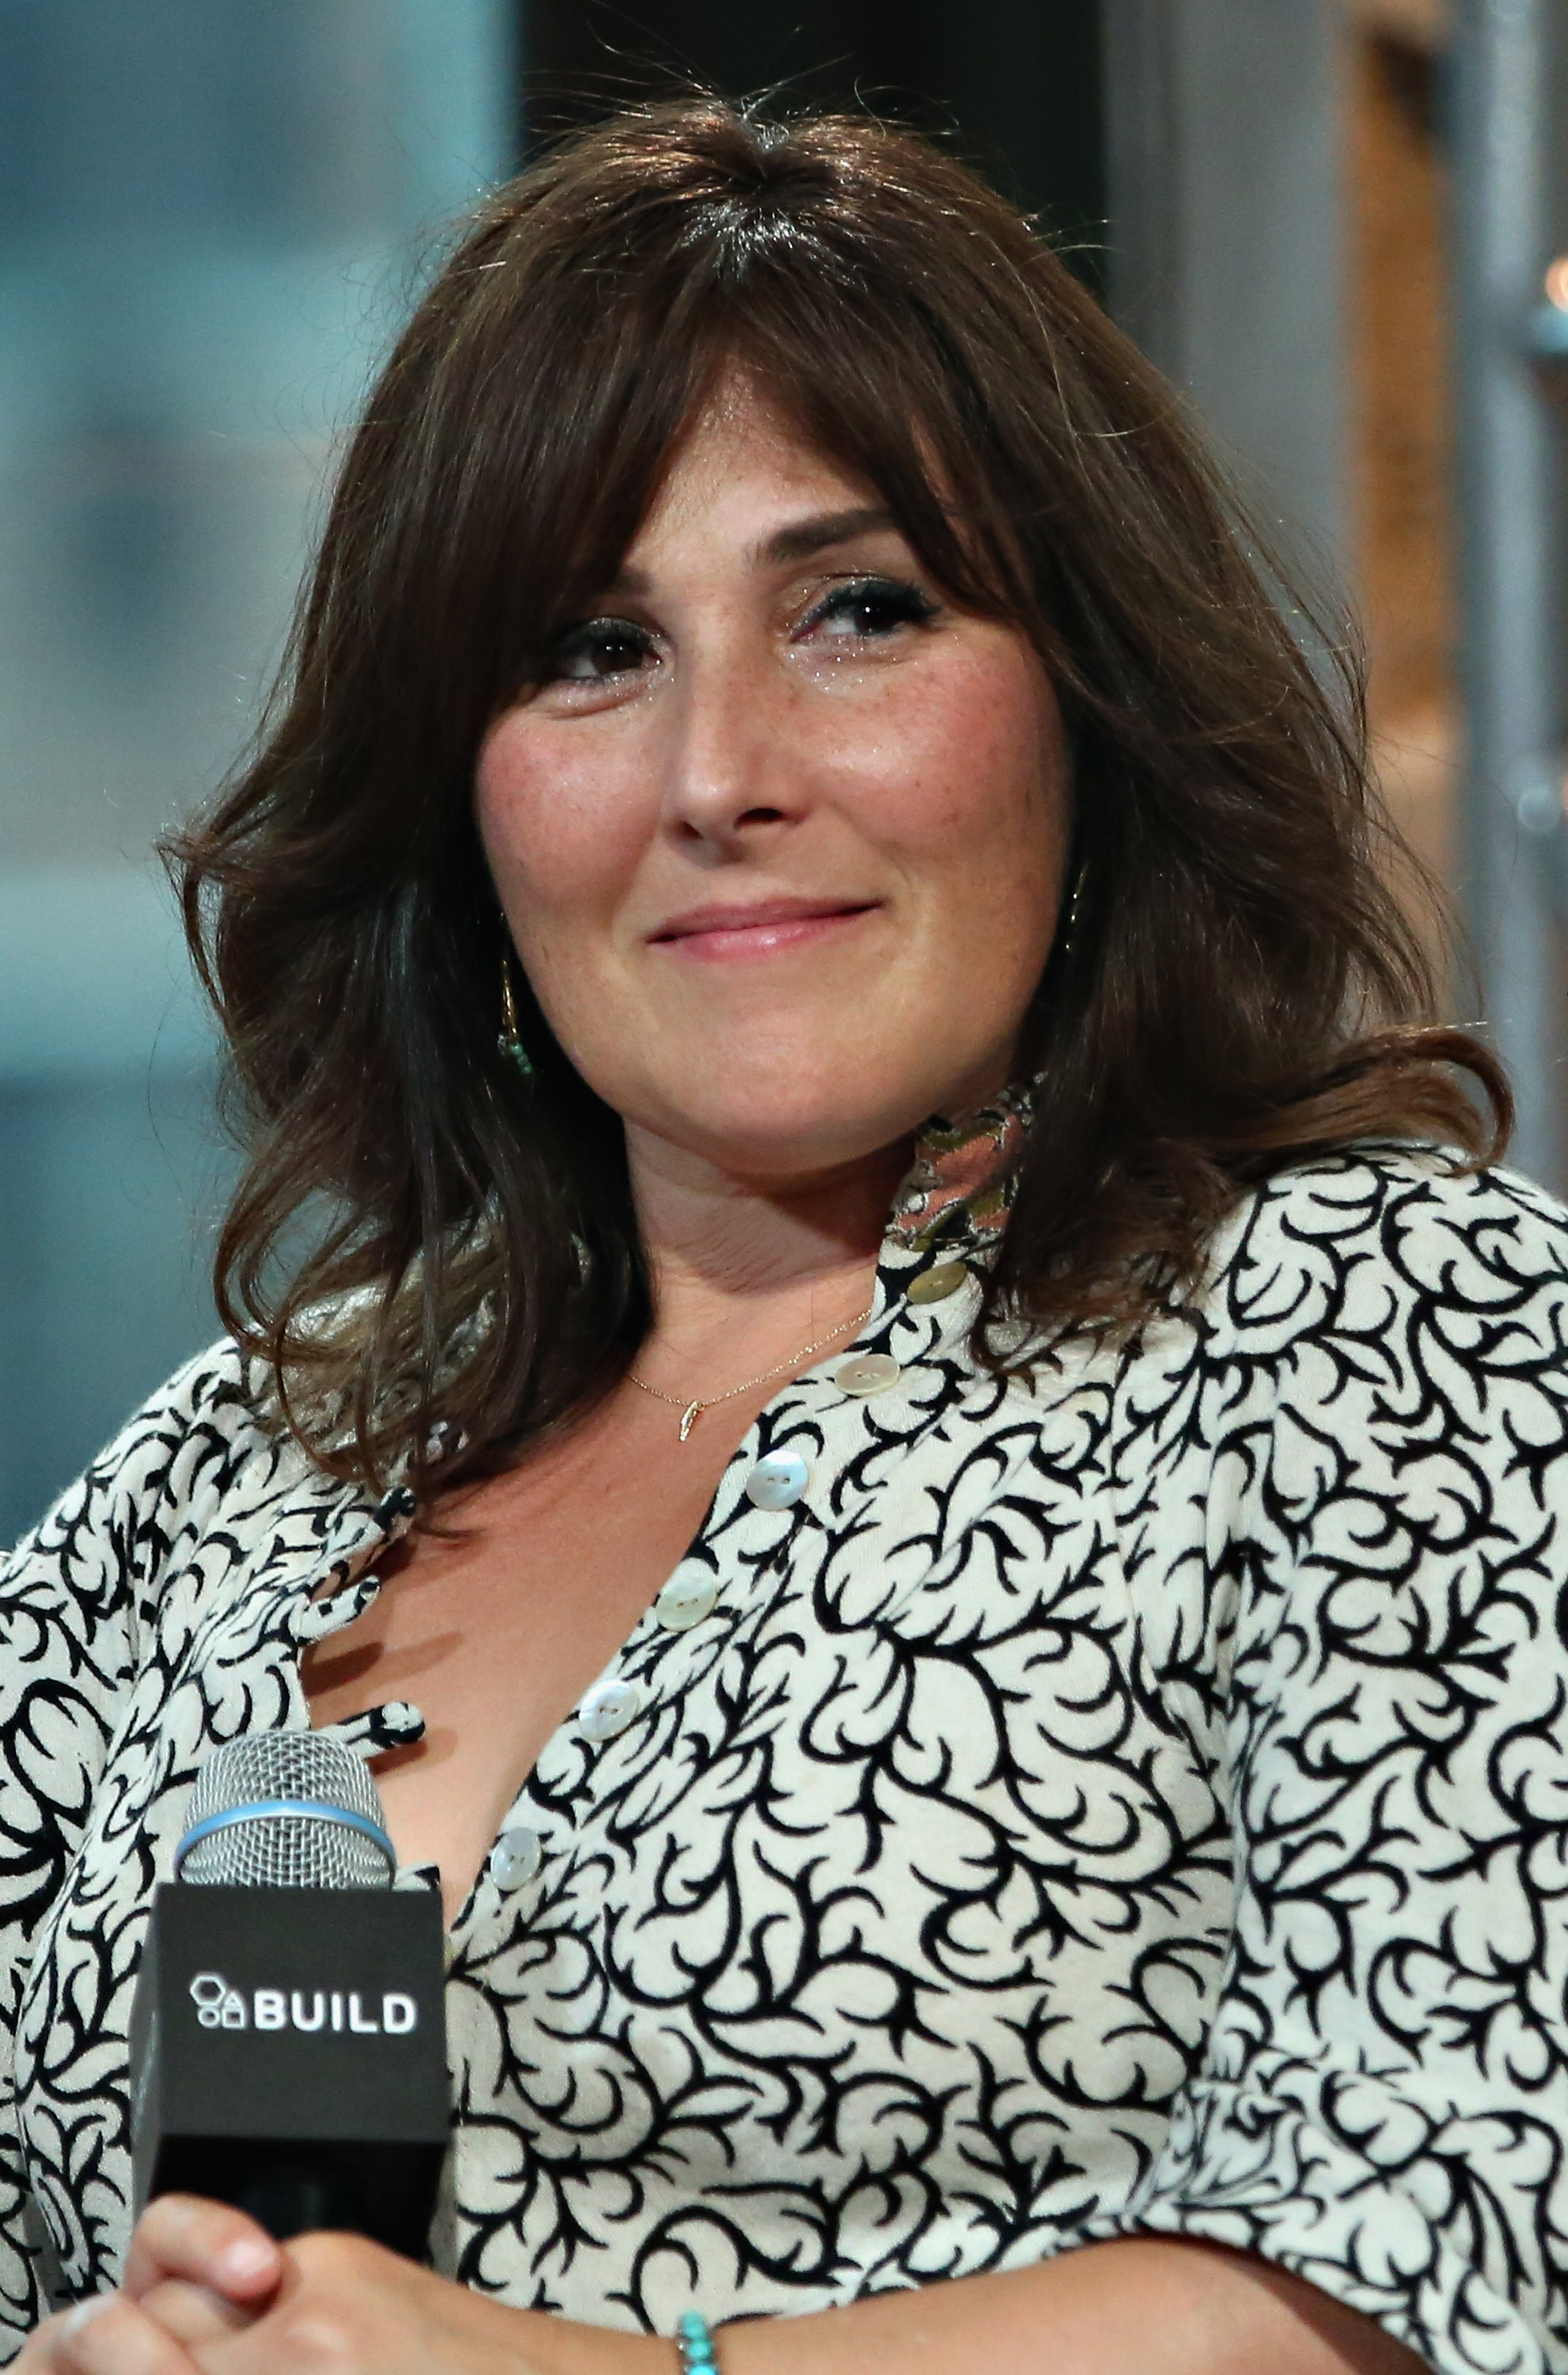 Ricki Lake at SiriusXM channel 'Radio Andy' in New York City, on September 21, 2015. | Source: Getty Images